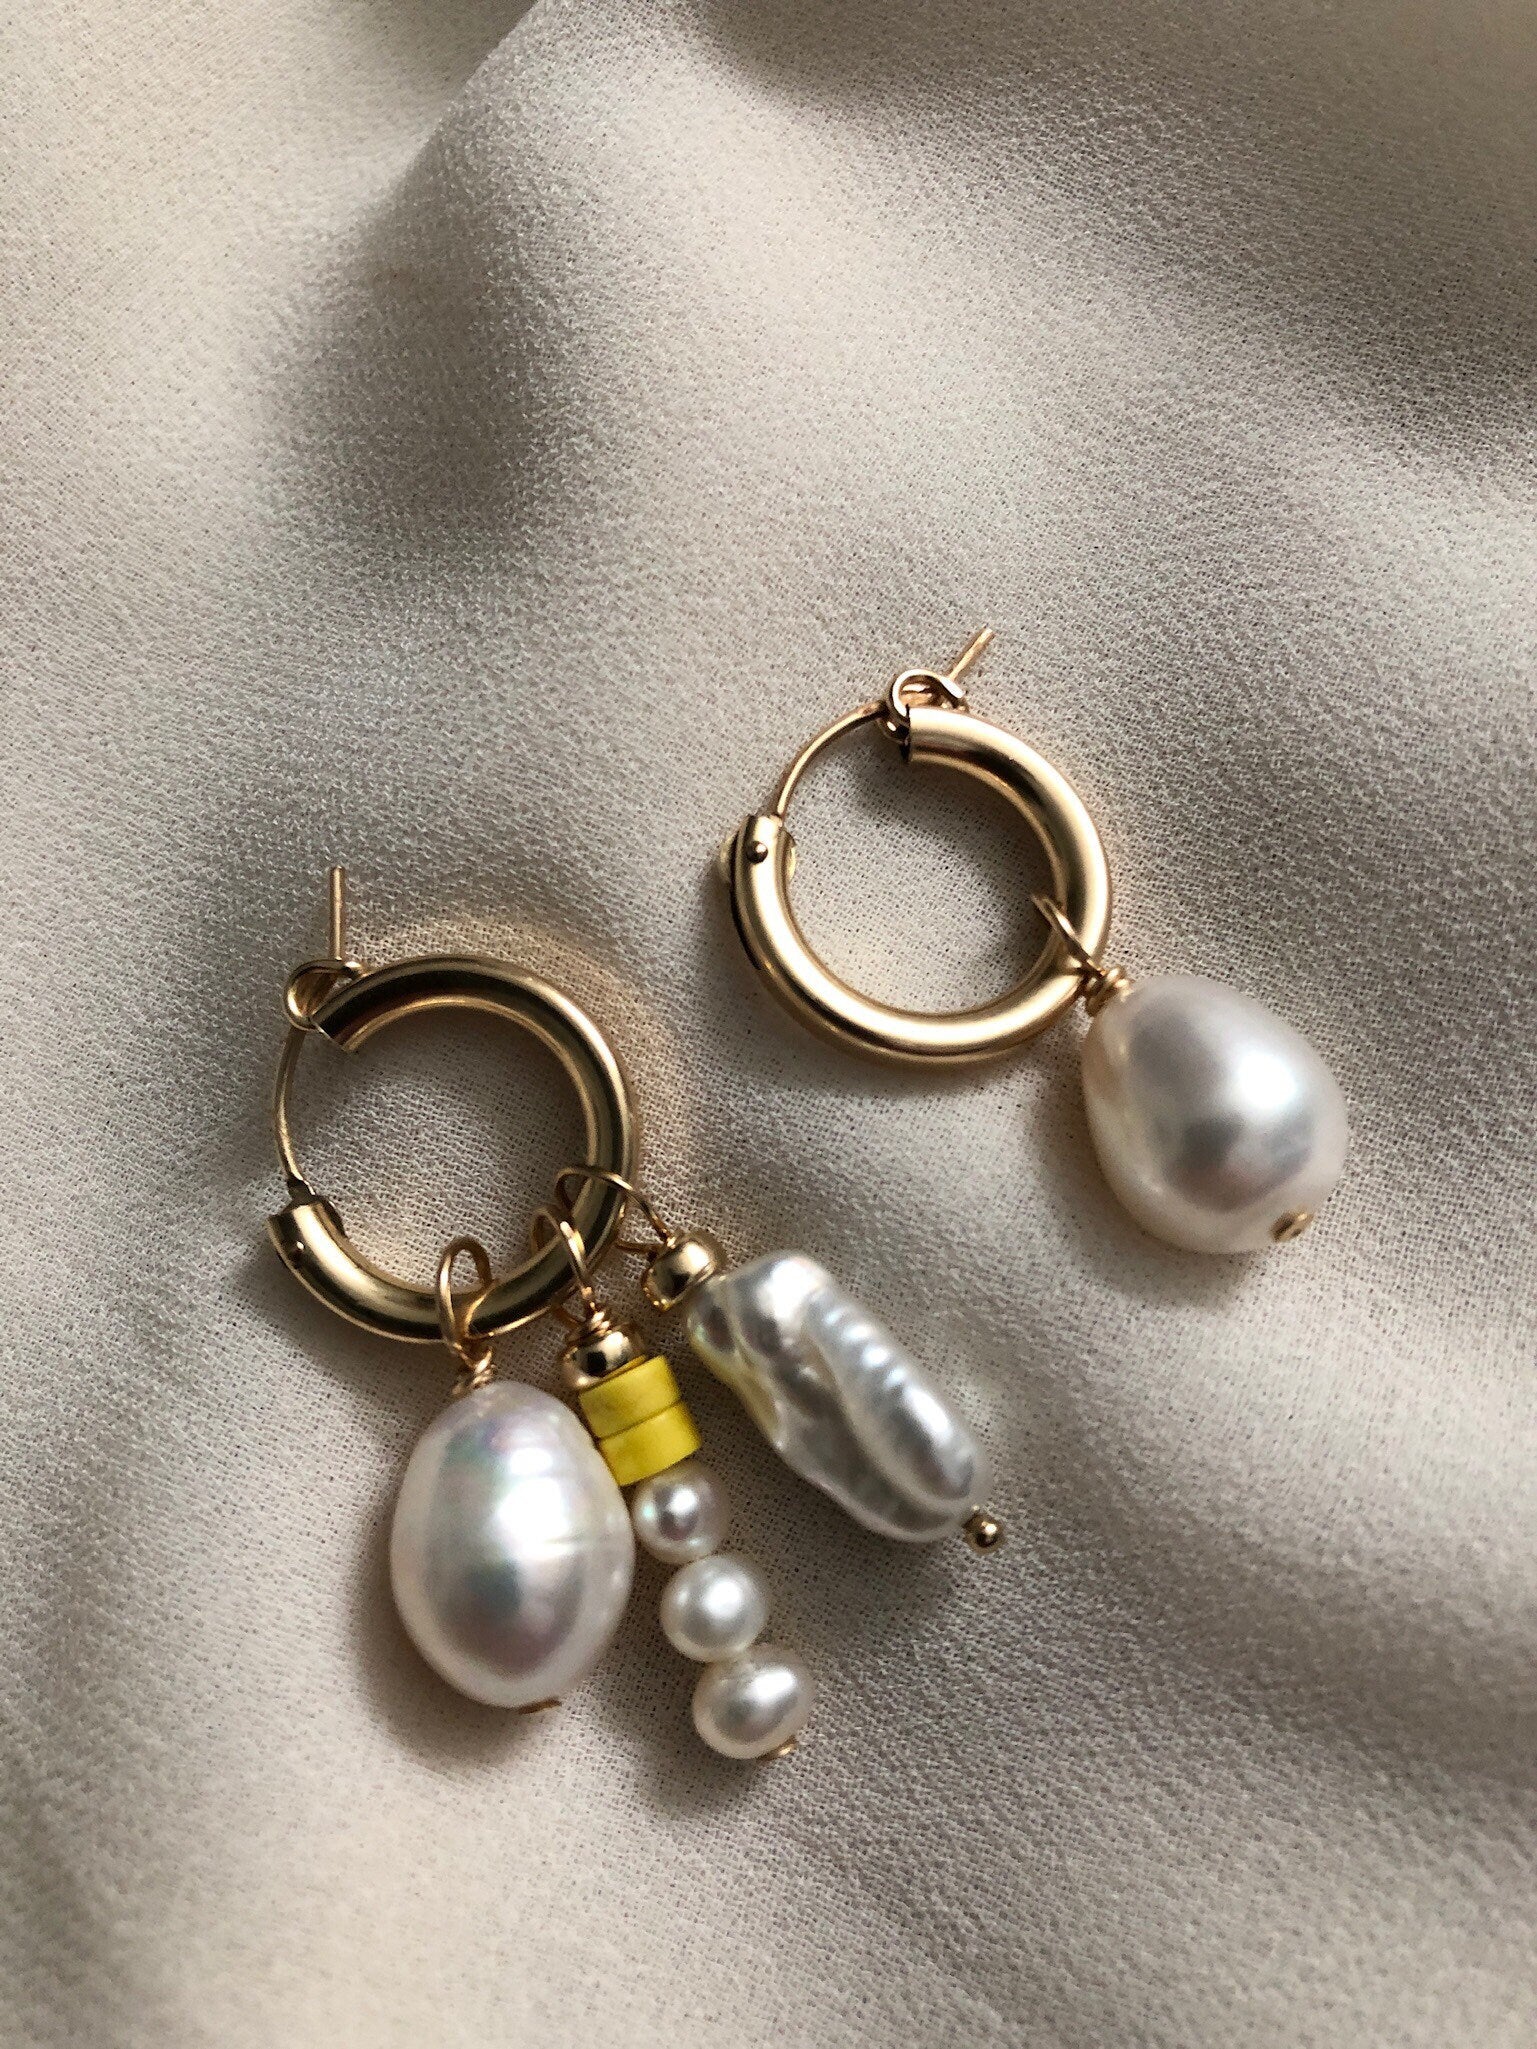 Aobei Pearl, 6 Pieces form the Sale, 18K Gold Earring Hoops with 3 Dangling  Holes for Jewelry Making, Jewelry Findings, DIY Handmade Earring  Accessories, ETS-K517